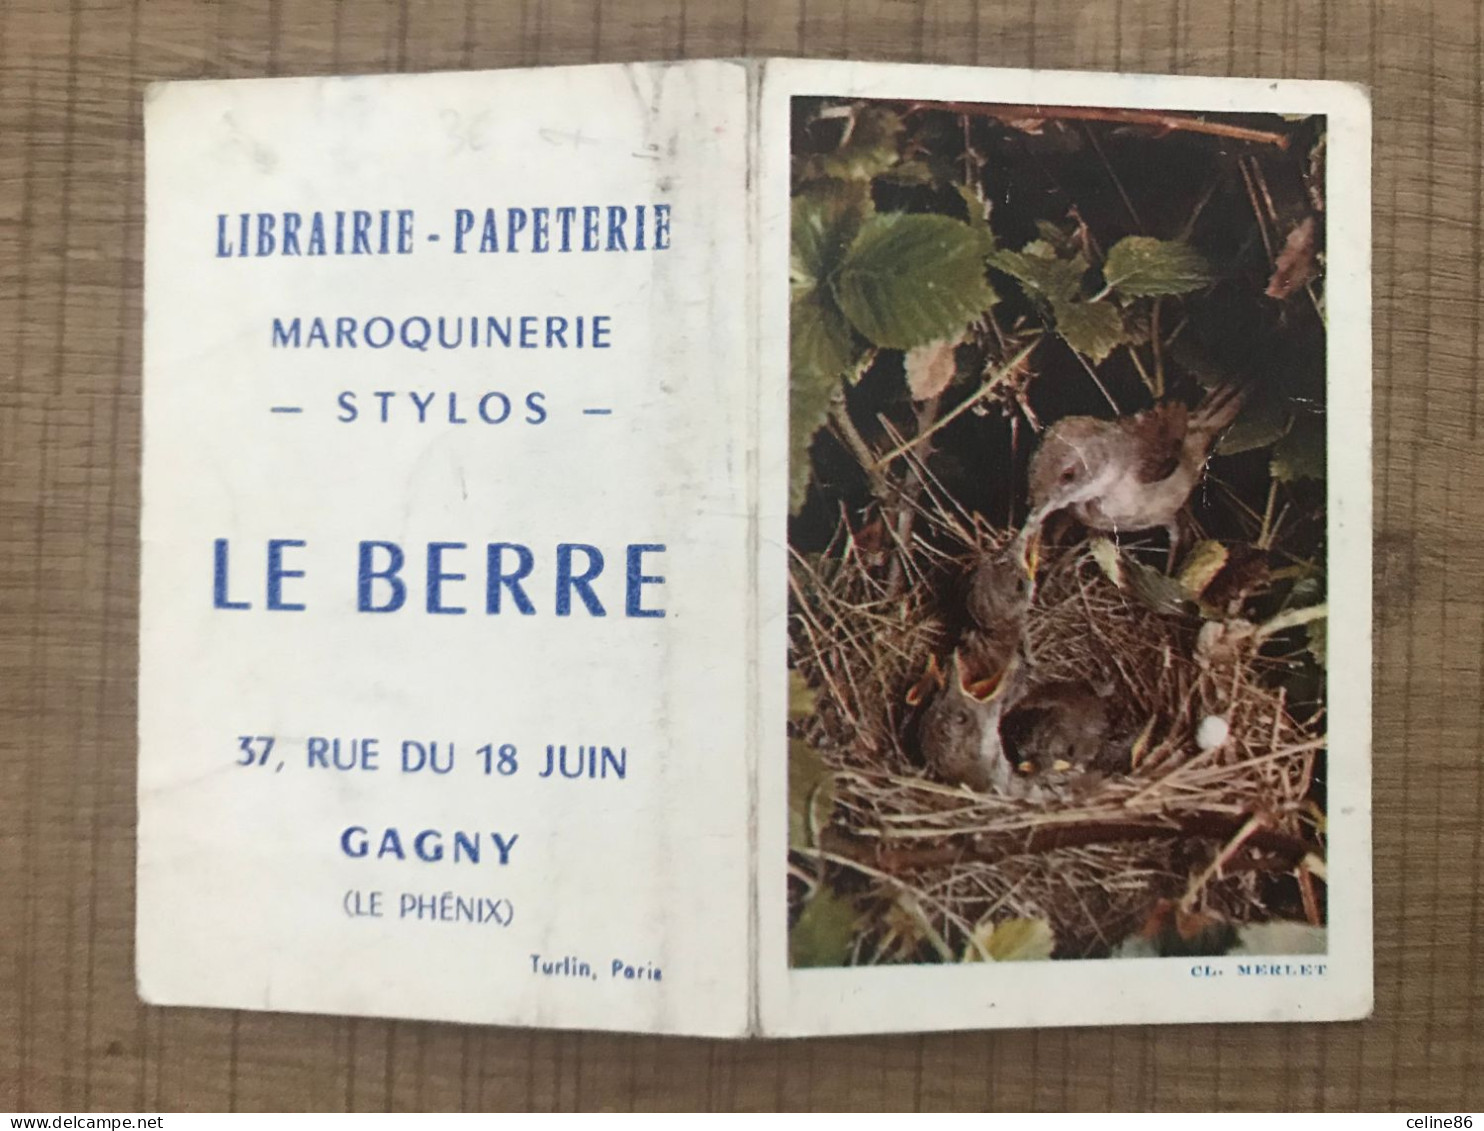 1964 MERLET Librairie Papeterie LE BERRE GAGNY - Small : 1961-70